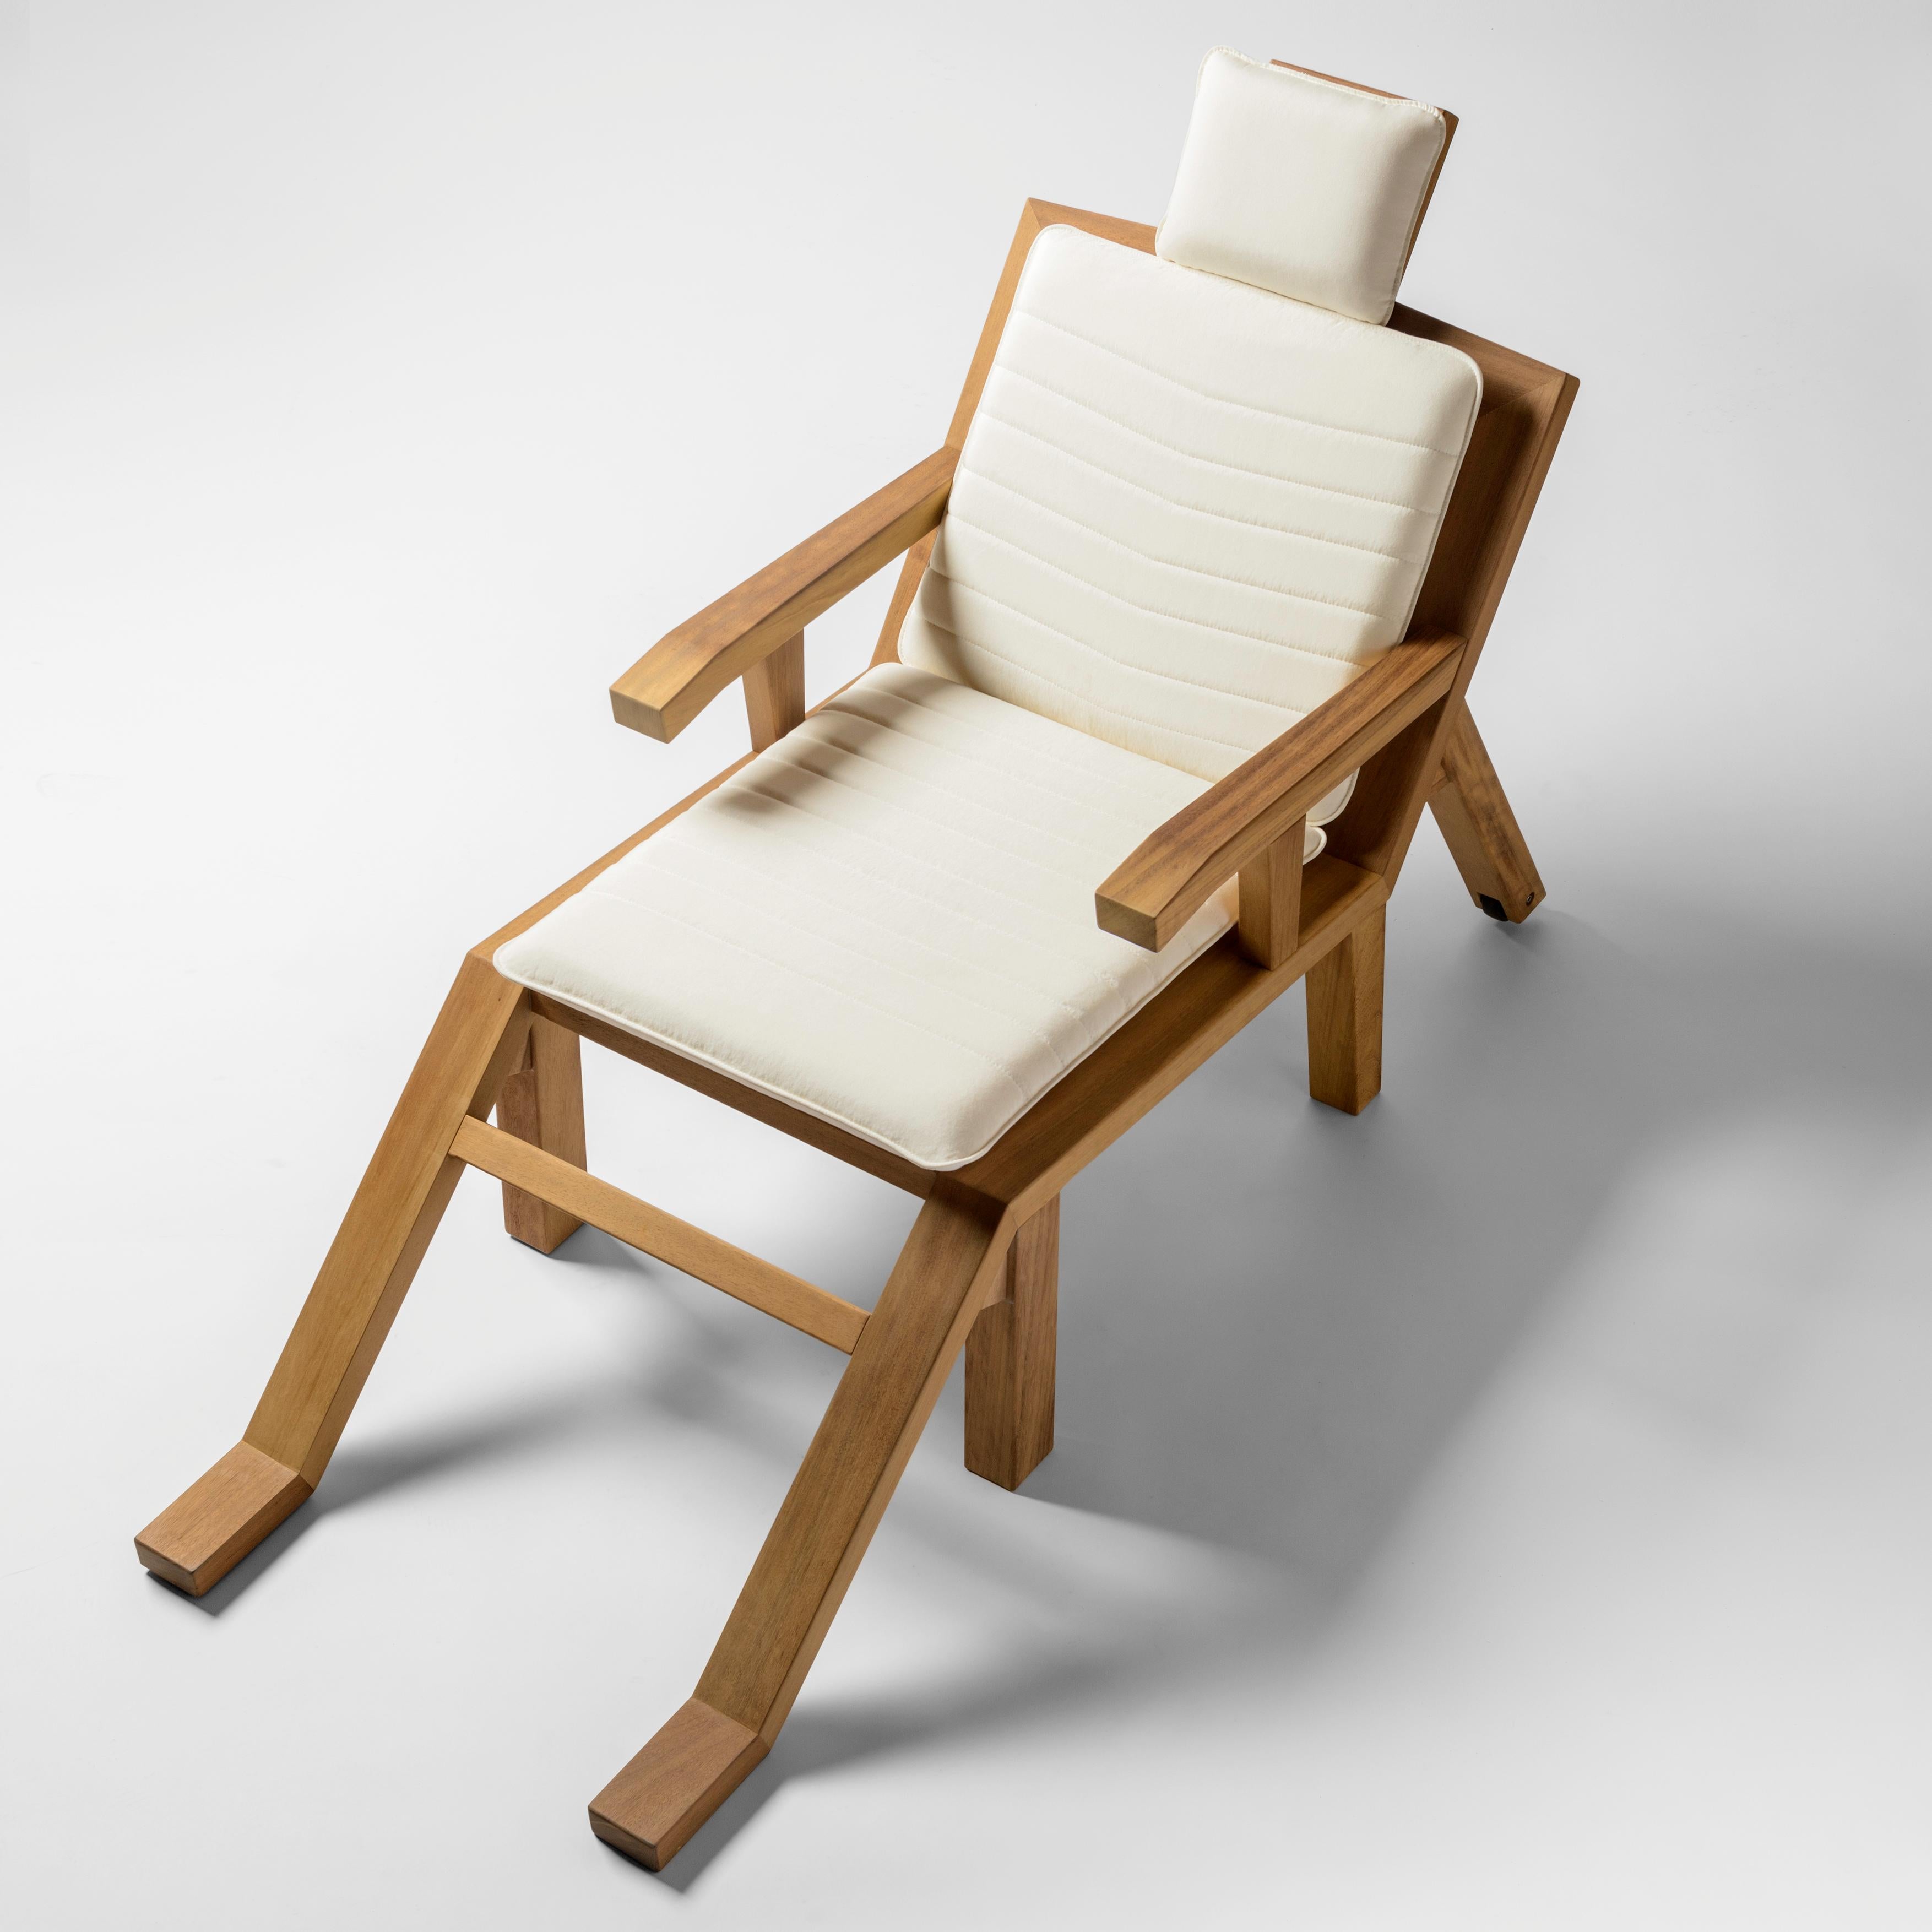 Design by Salvador Dalí­­, 1903 
manufactured by BD Barcelona

Solid Iroko wooden structure with polyamide wheels. Optional upholstered cushion with water repellent foam and material Apt for outdoor use. The cover is removable.

Measures: 69 x 180 x